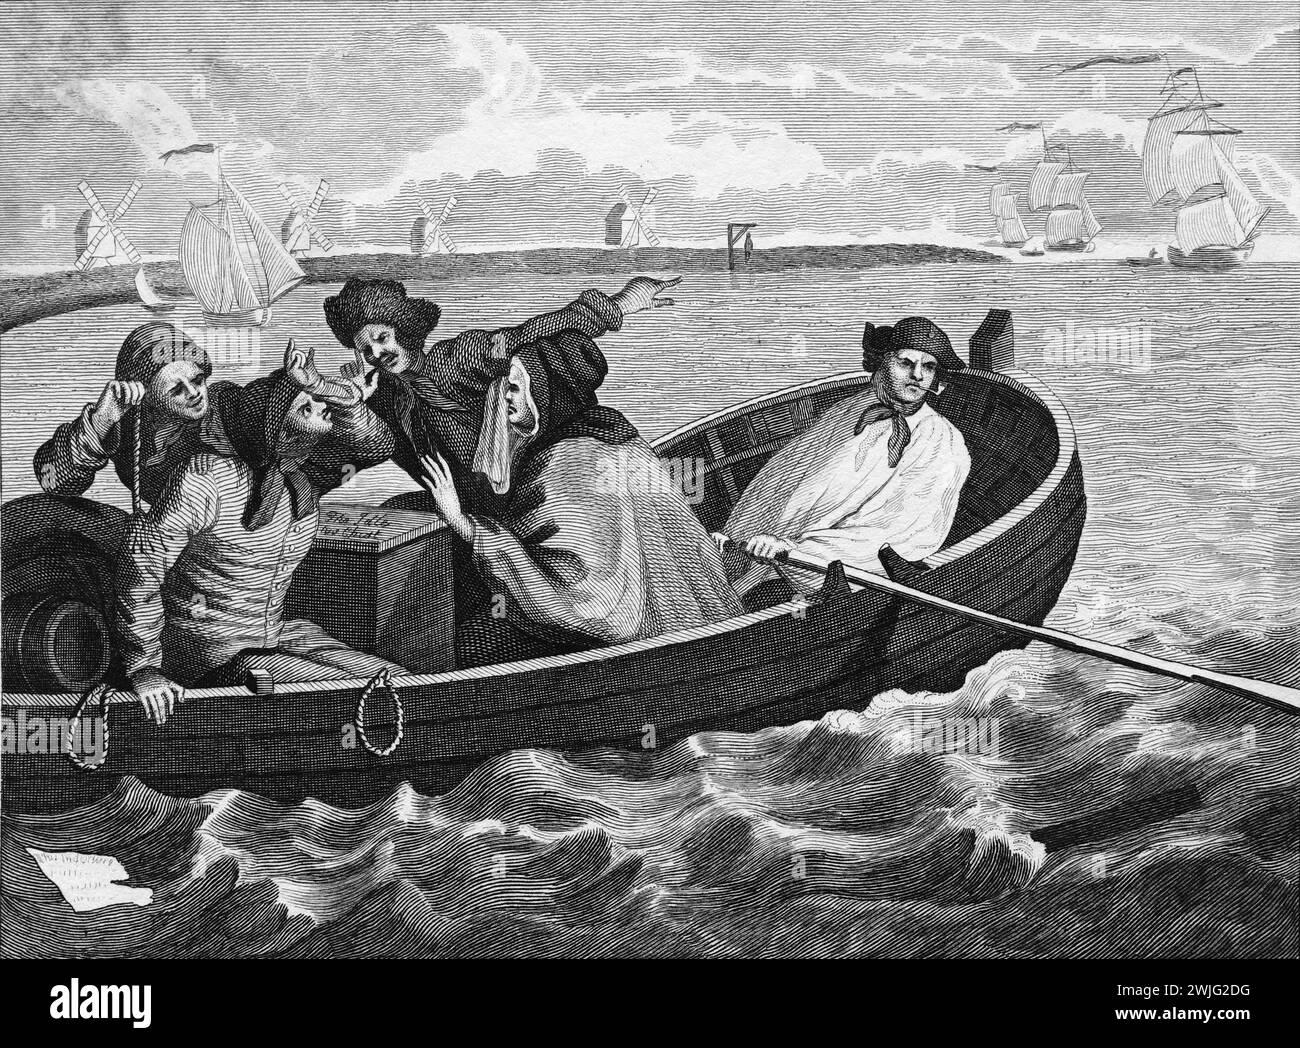 Black and White Illustration: 'The Idle 'Prentice Turned Away and Sent to Sea'. Engraving after William Hogarth (1697 - 1764)  from his series, 'Industry and Idleness'. His earlier series of painted works, 'The Harlot's Progress' and 'Marriage à-la-mode' which were subsequently released as engravings, 'Industry and Idleness' was engraved from the outset. Hogarth's aim in this series was to illustrate the possible rewards for working  hard, and the pitfalls of not doing so, a message predominantly aimed at working children.  This reproduction was by Thomas Cook and originally published 1806. Stock Photo